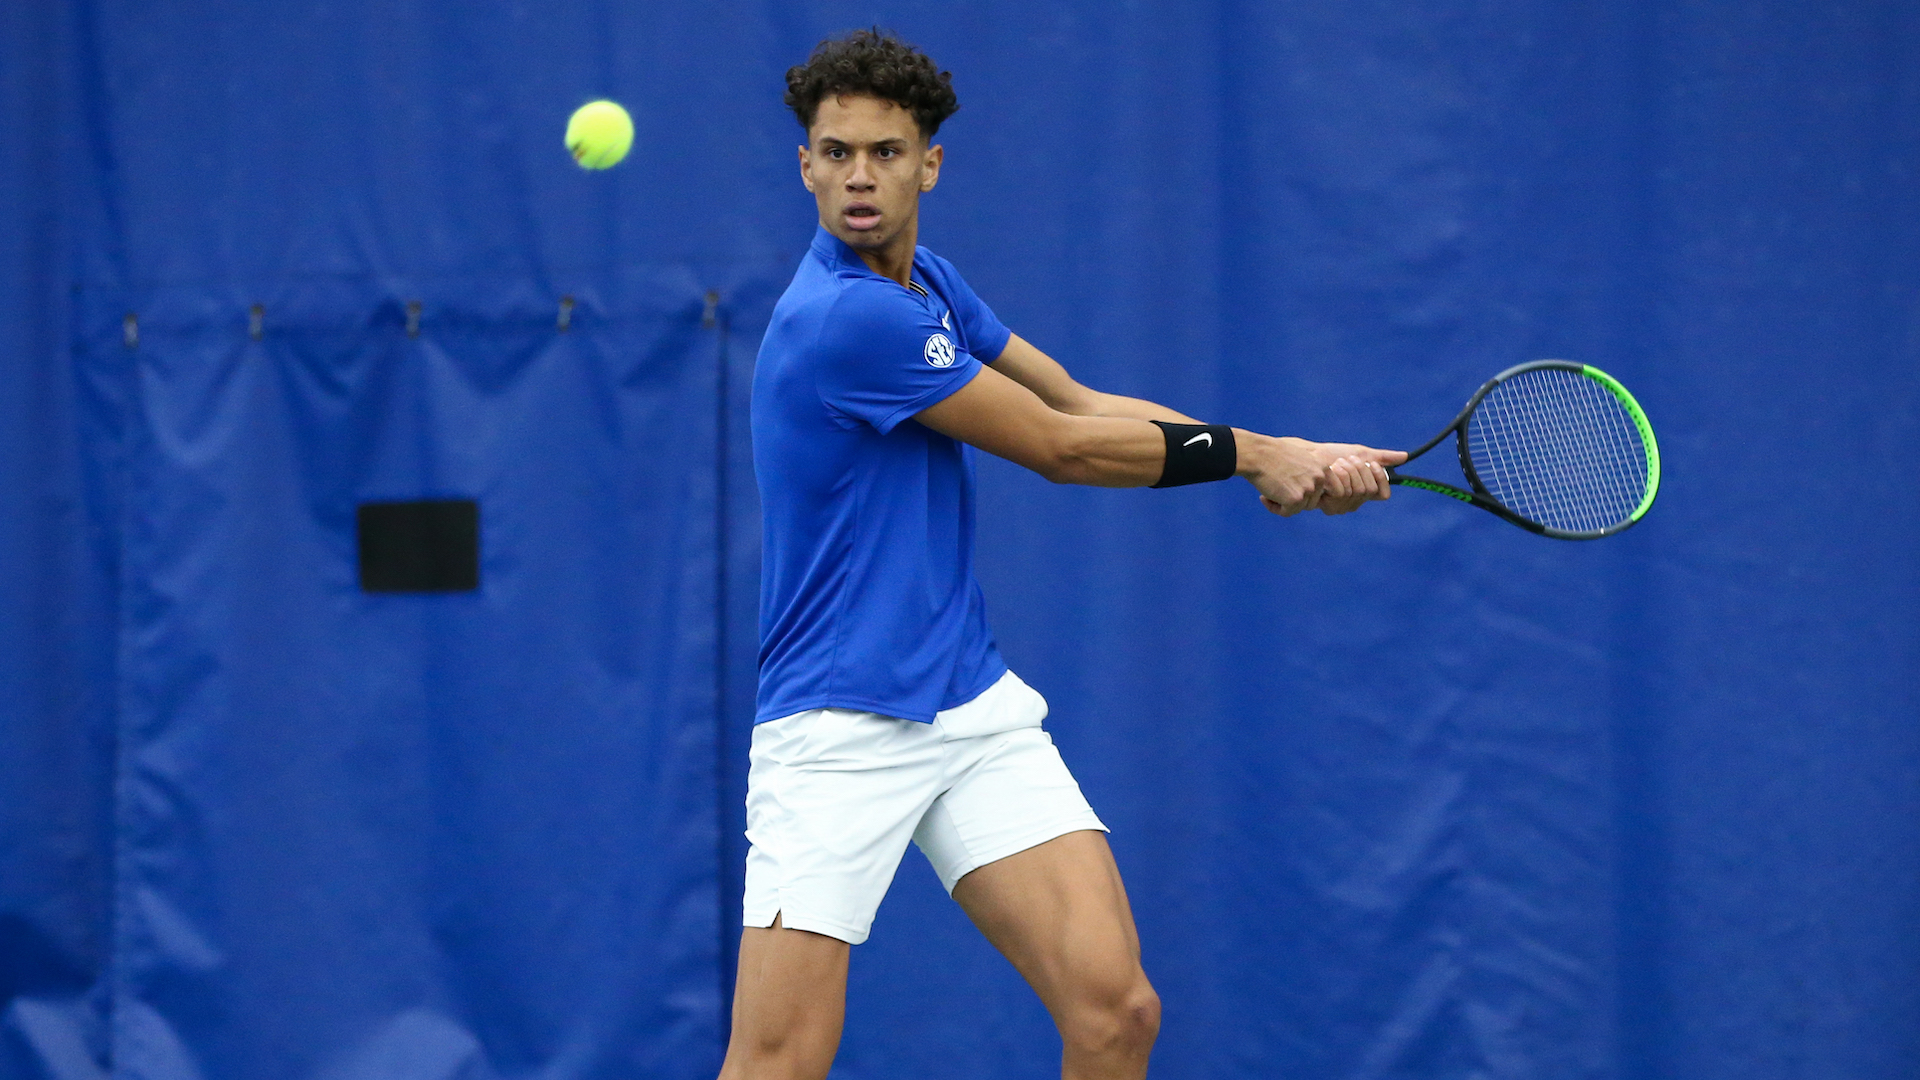 Kentucky Sweeps Alabama to Earn First Conference Win